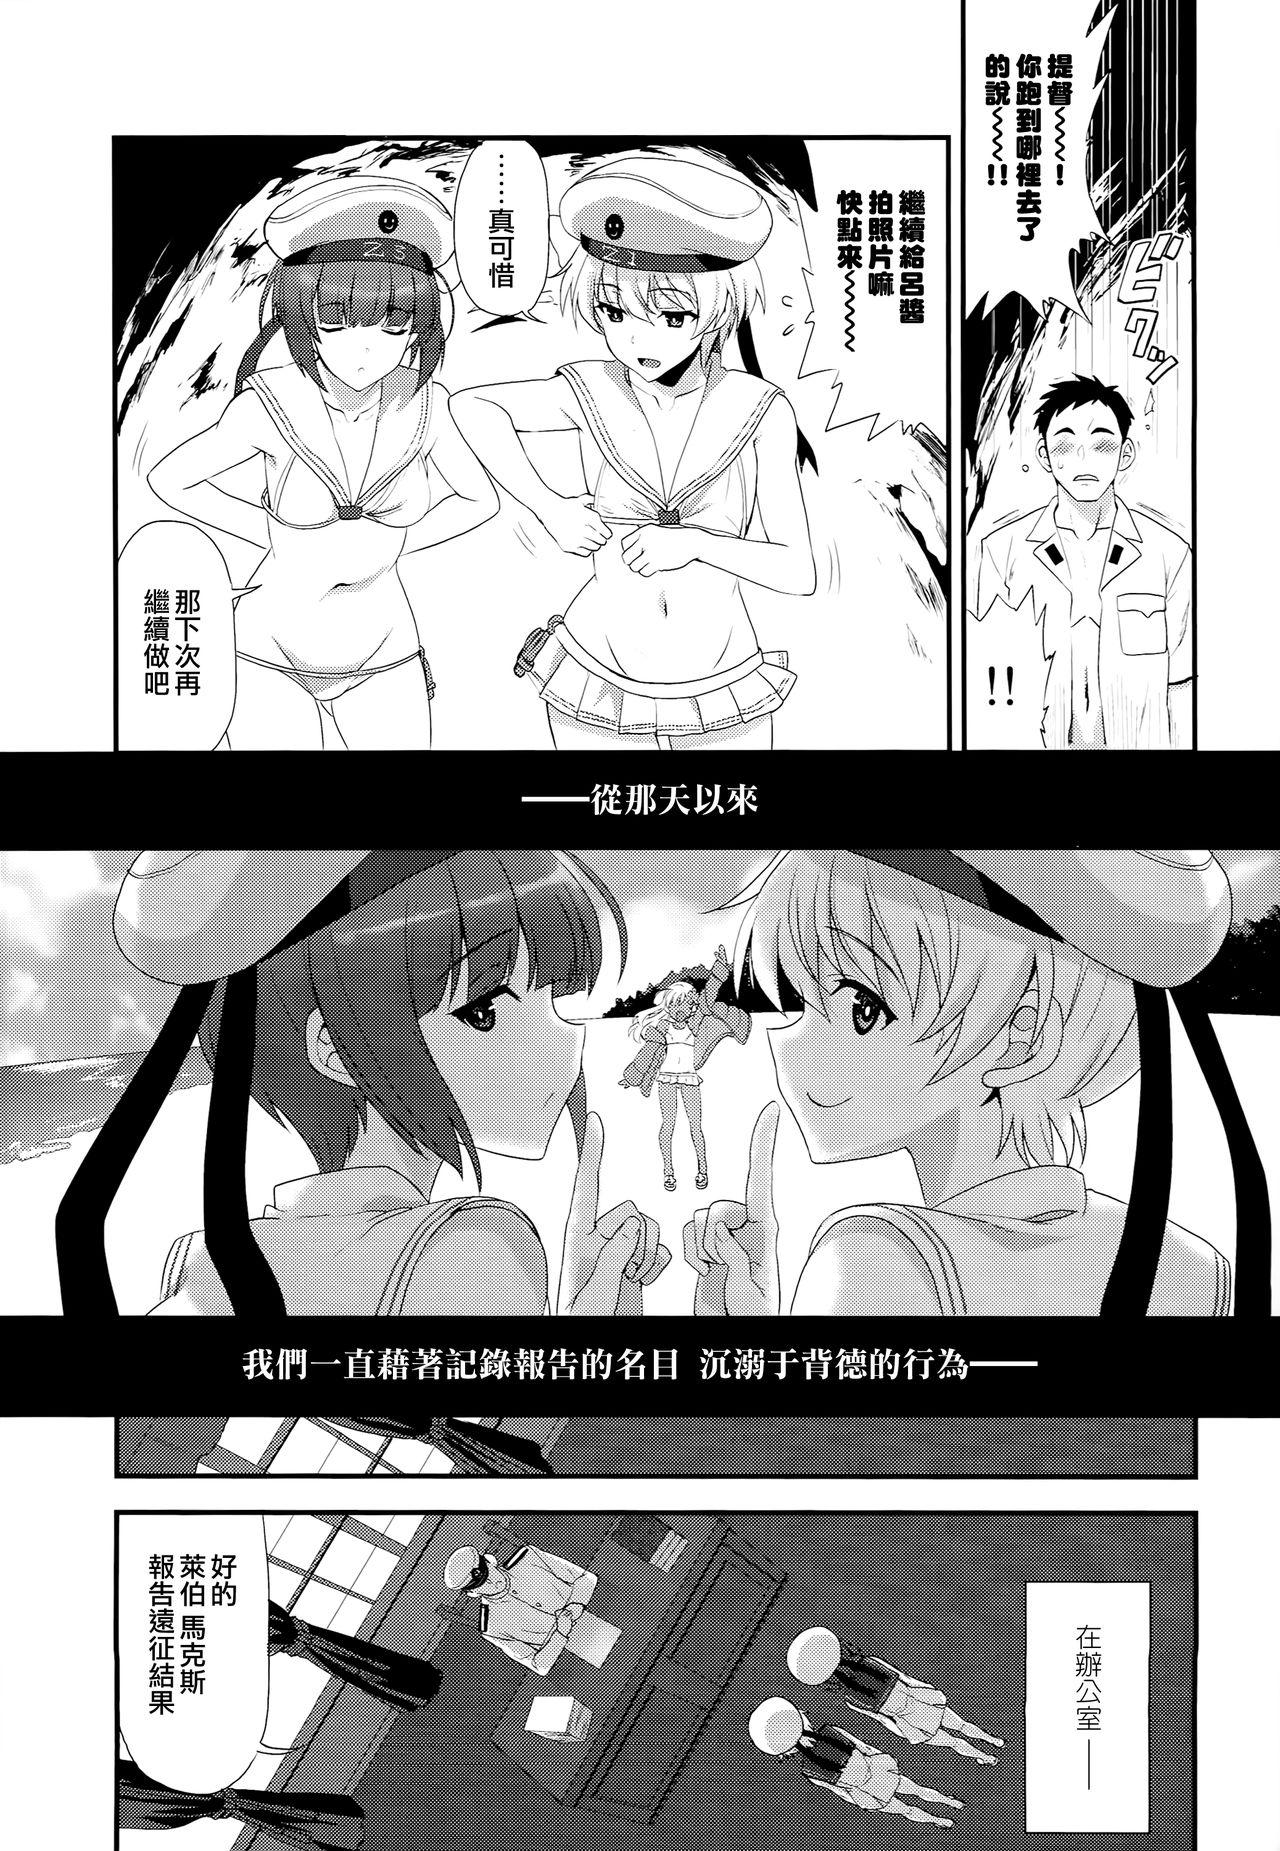 Tits Apfelschorle - Kantai collection Liveshow - Page 11